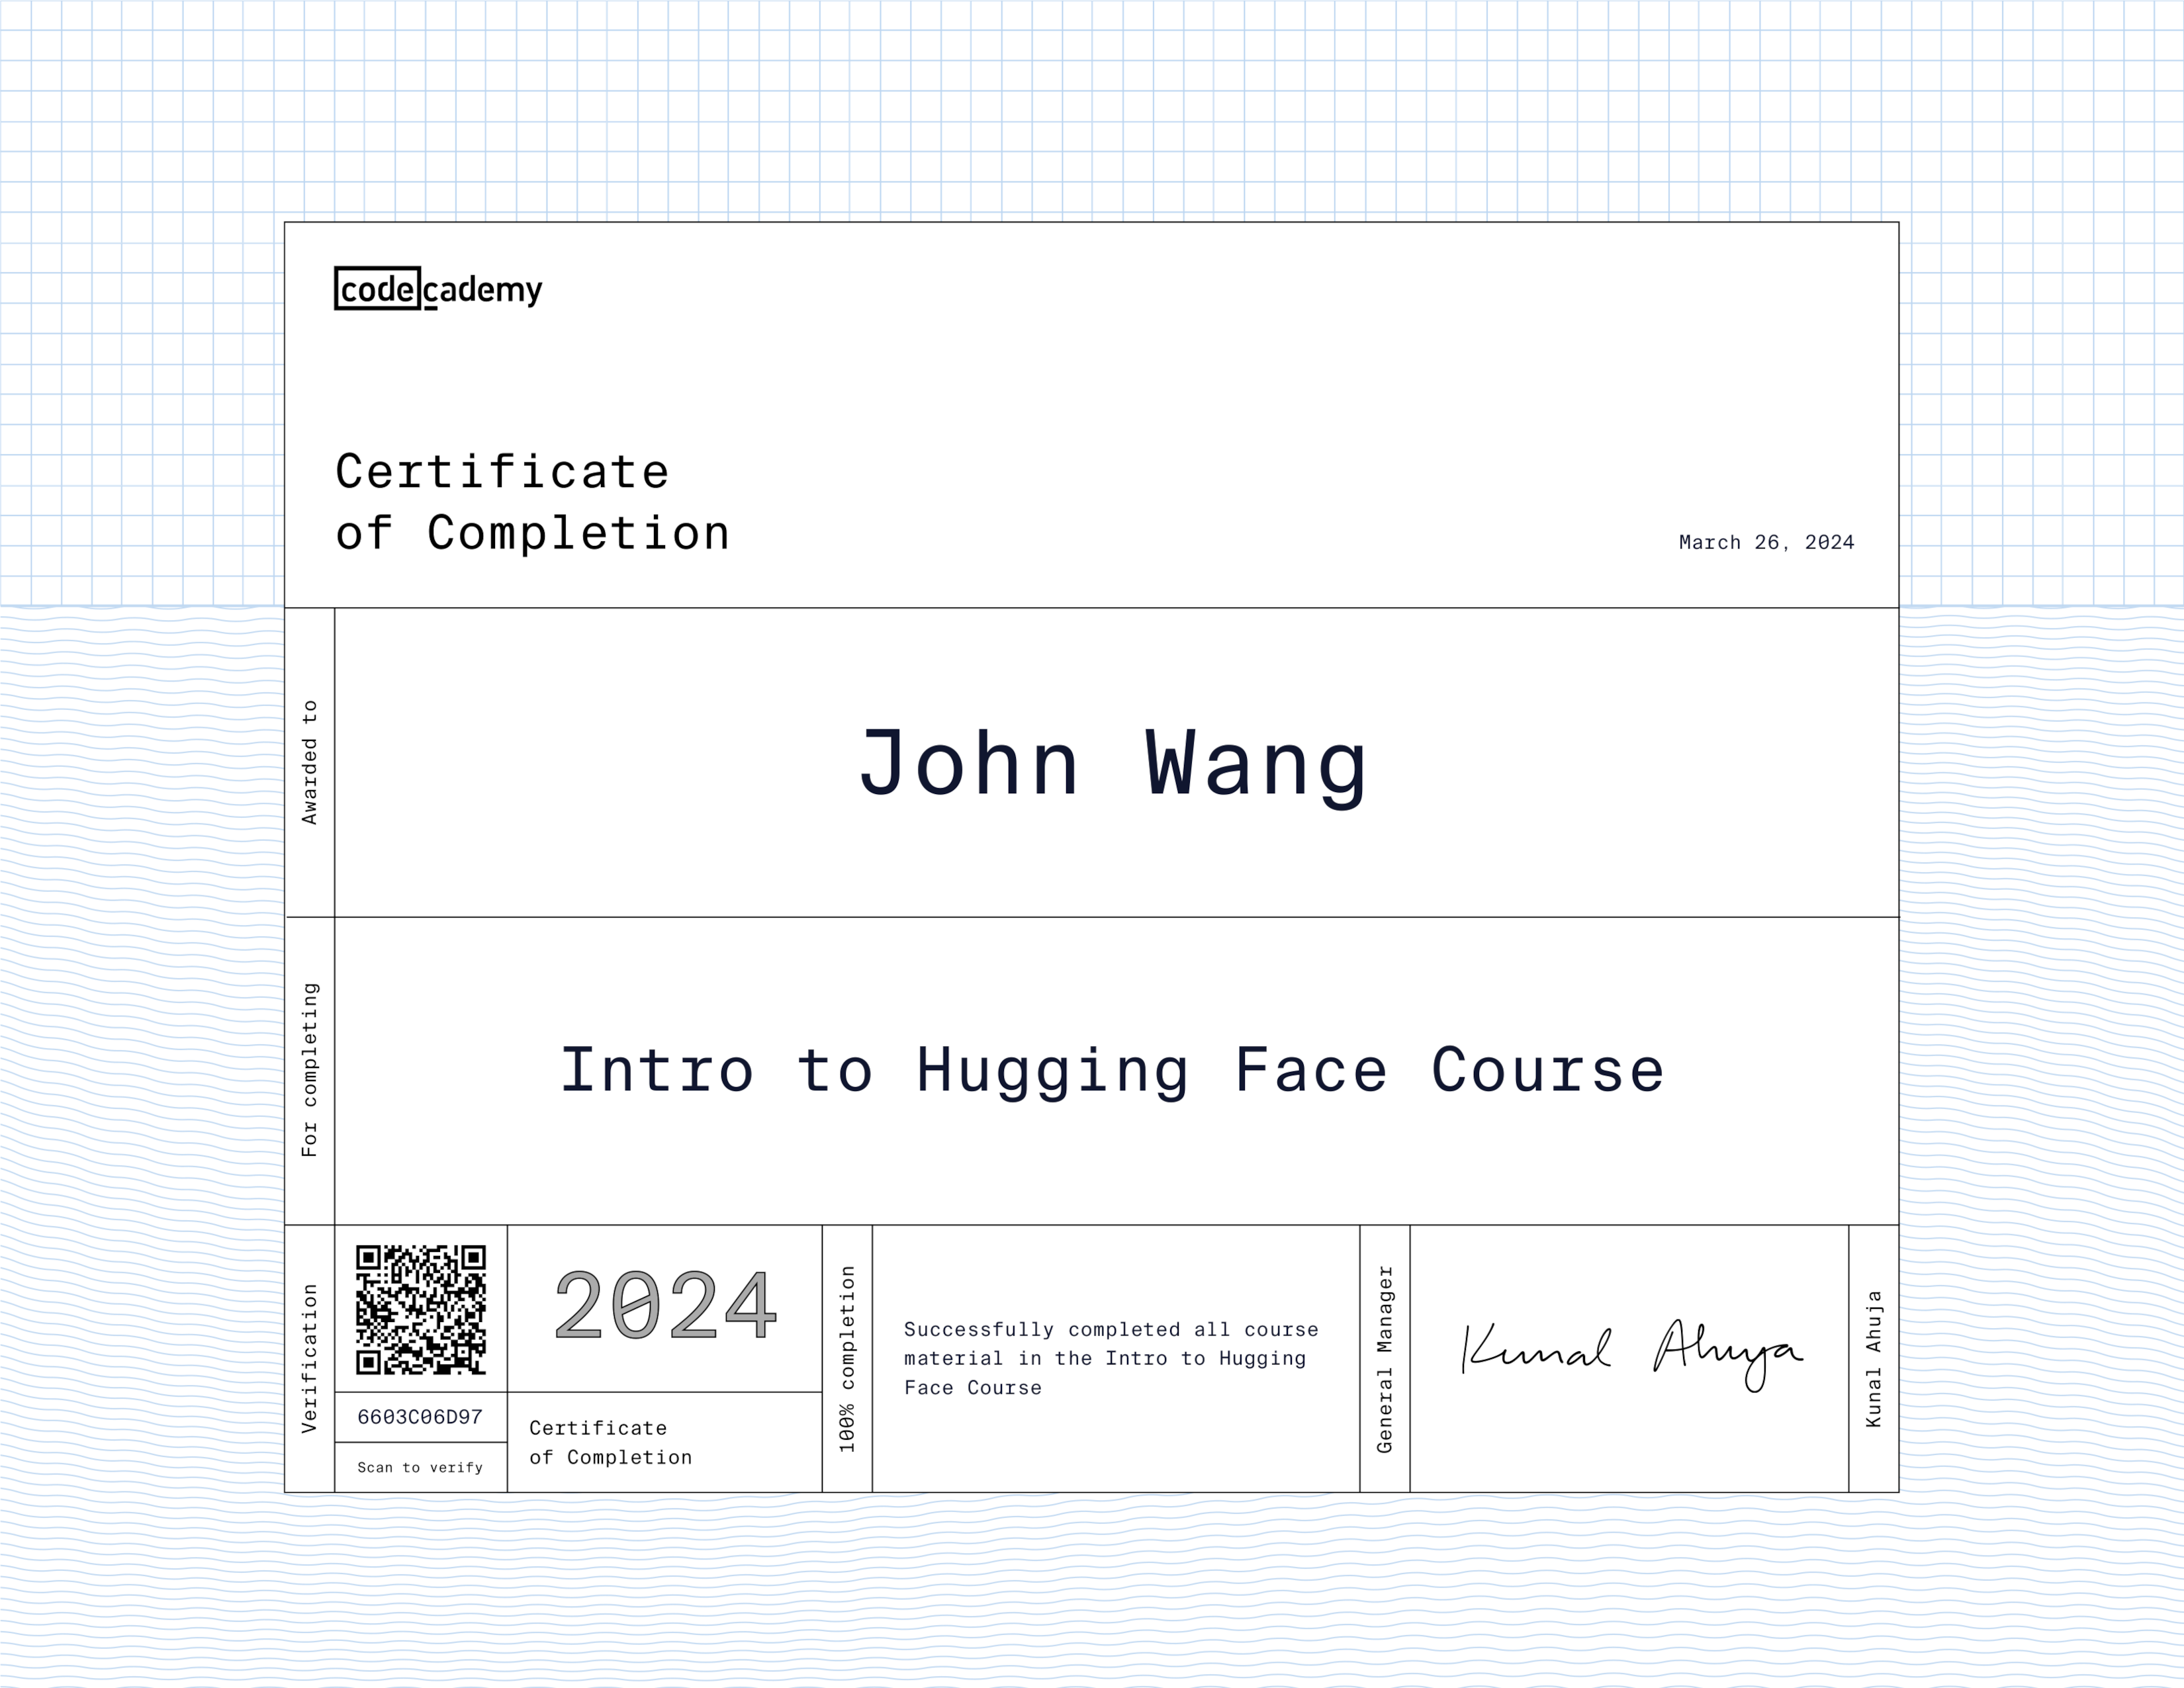 John's Intro to Hugging Face from Codecademy